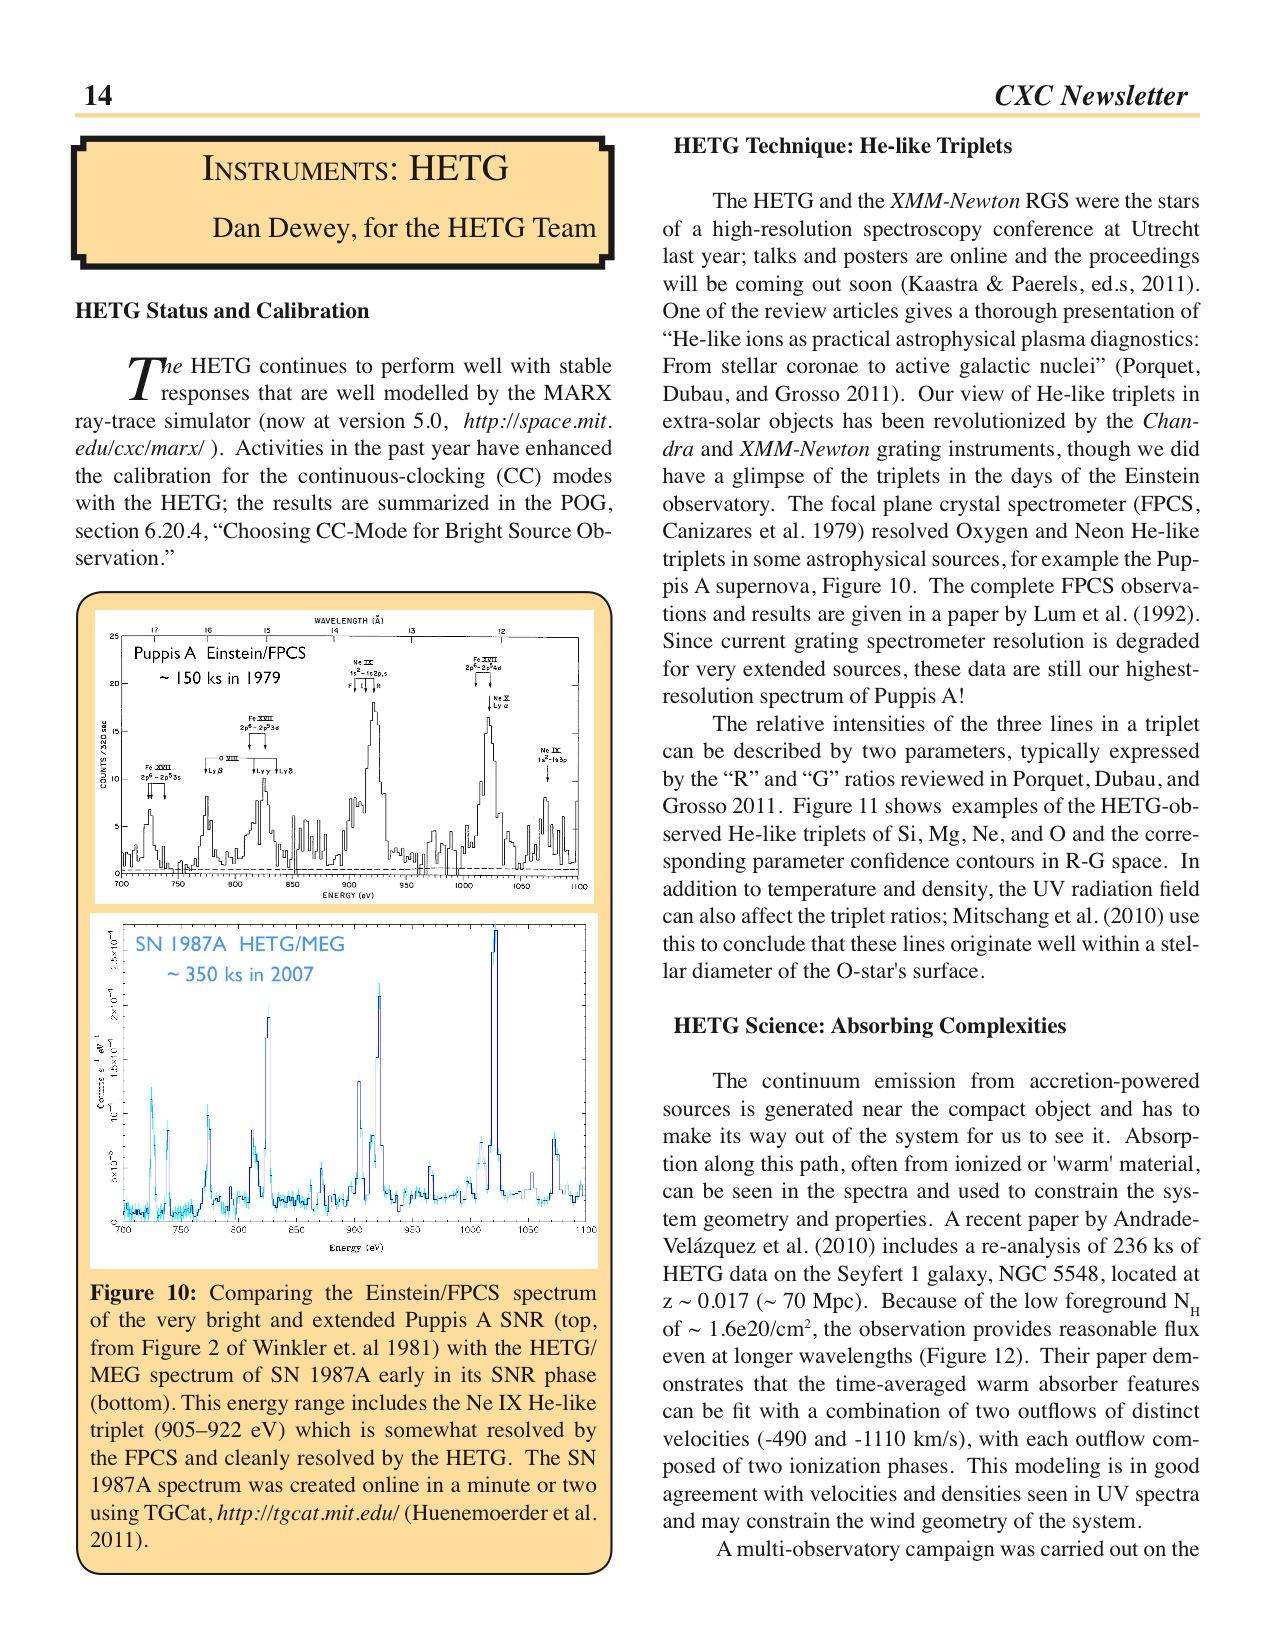 Page 14 of the Chandra Newsletter, issue 18.